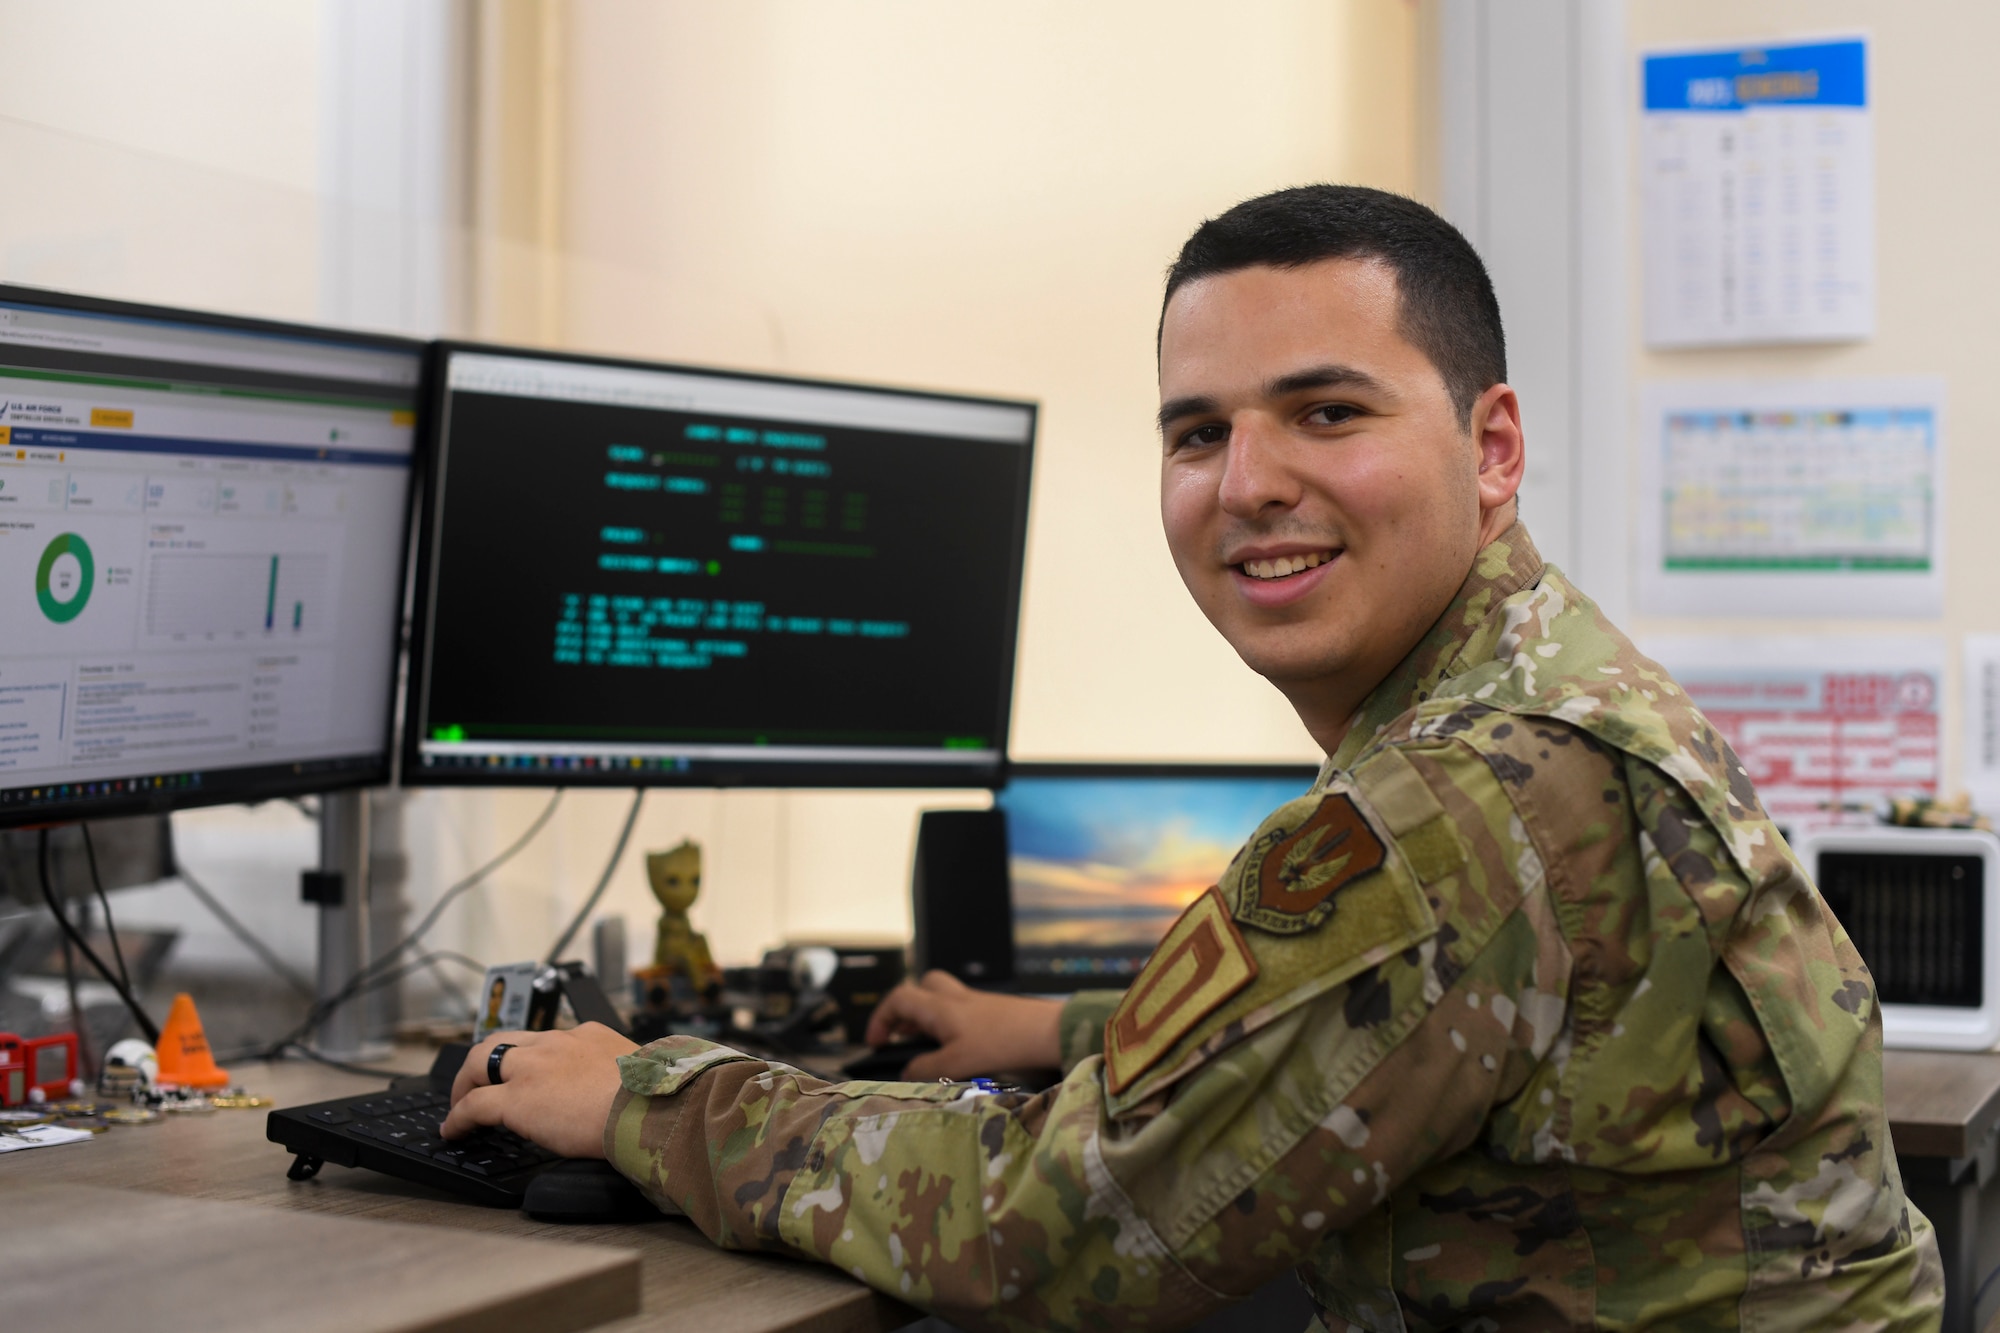 U.S. Air Force Senior Airman Jake Pineiros, 100th Comptroller Squadron finance technician poses in front of his desk on Aug. 3, 2021 at Royal Air Force Mildenhall, England. Pineiros pursues his Community College of the Air Force degree and is two classes away from completion. (U.S. Air Force Photo by Senior Airman Antonia Herrera)